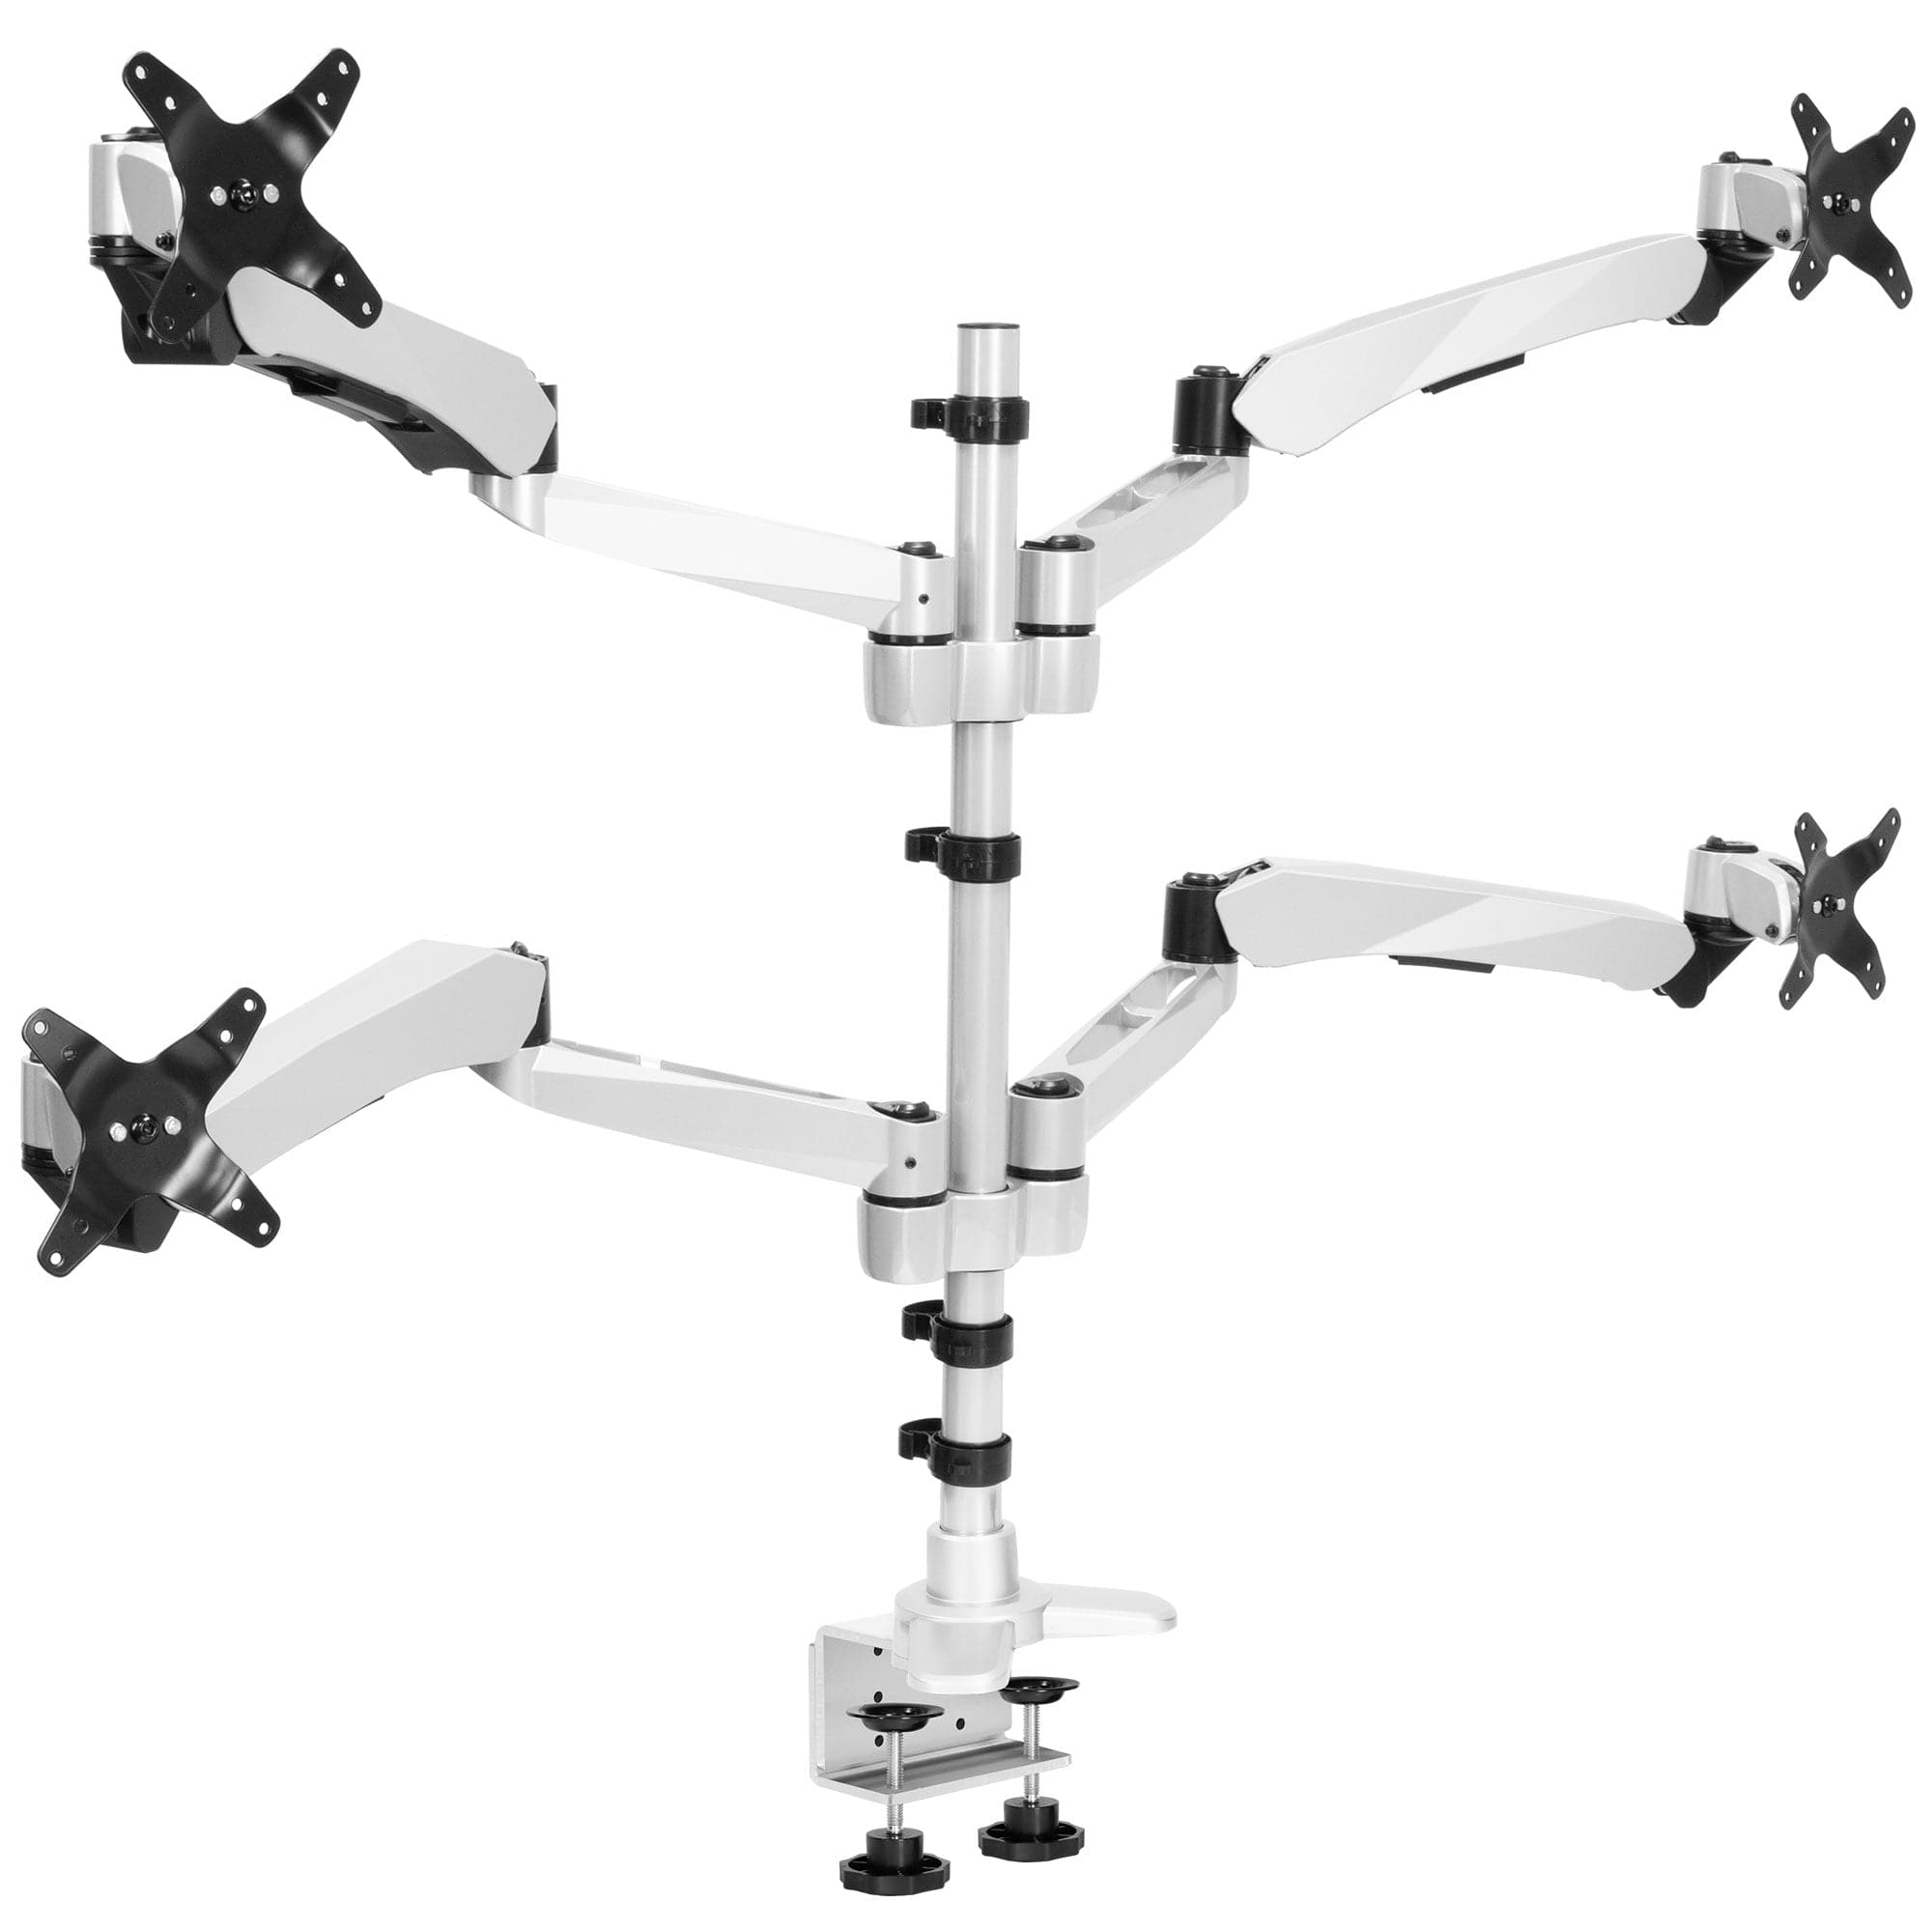 Full Motion Quad Monitor Desk Mount w/ Spring Arms - Mount-It!